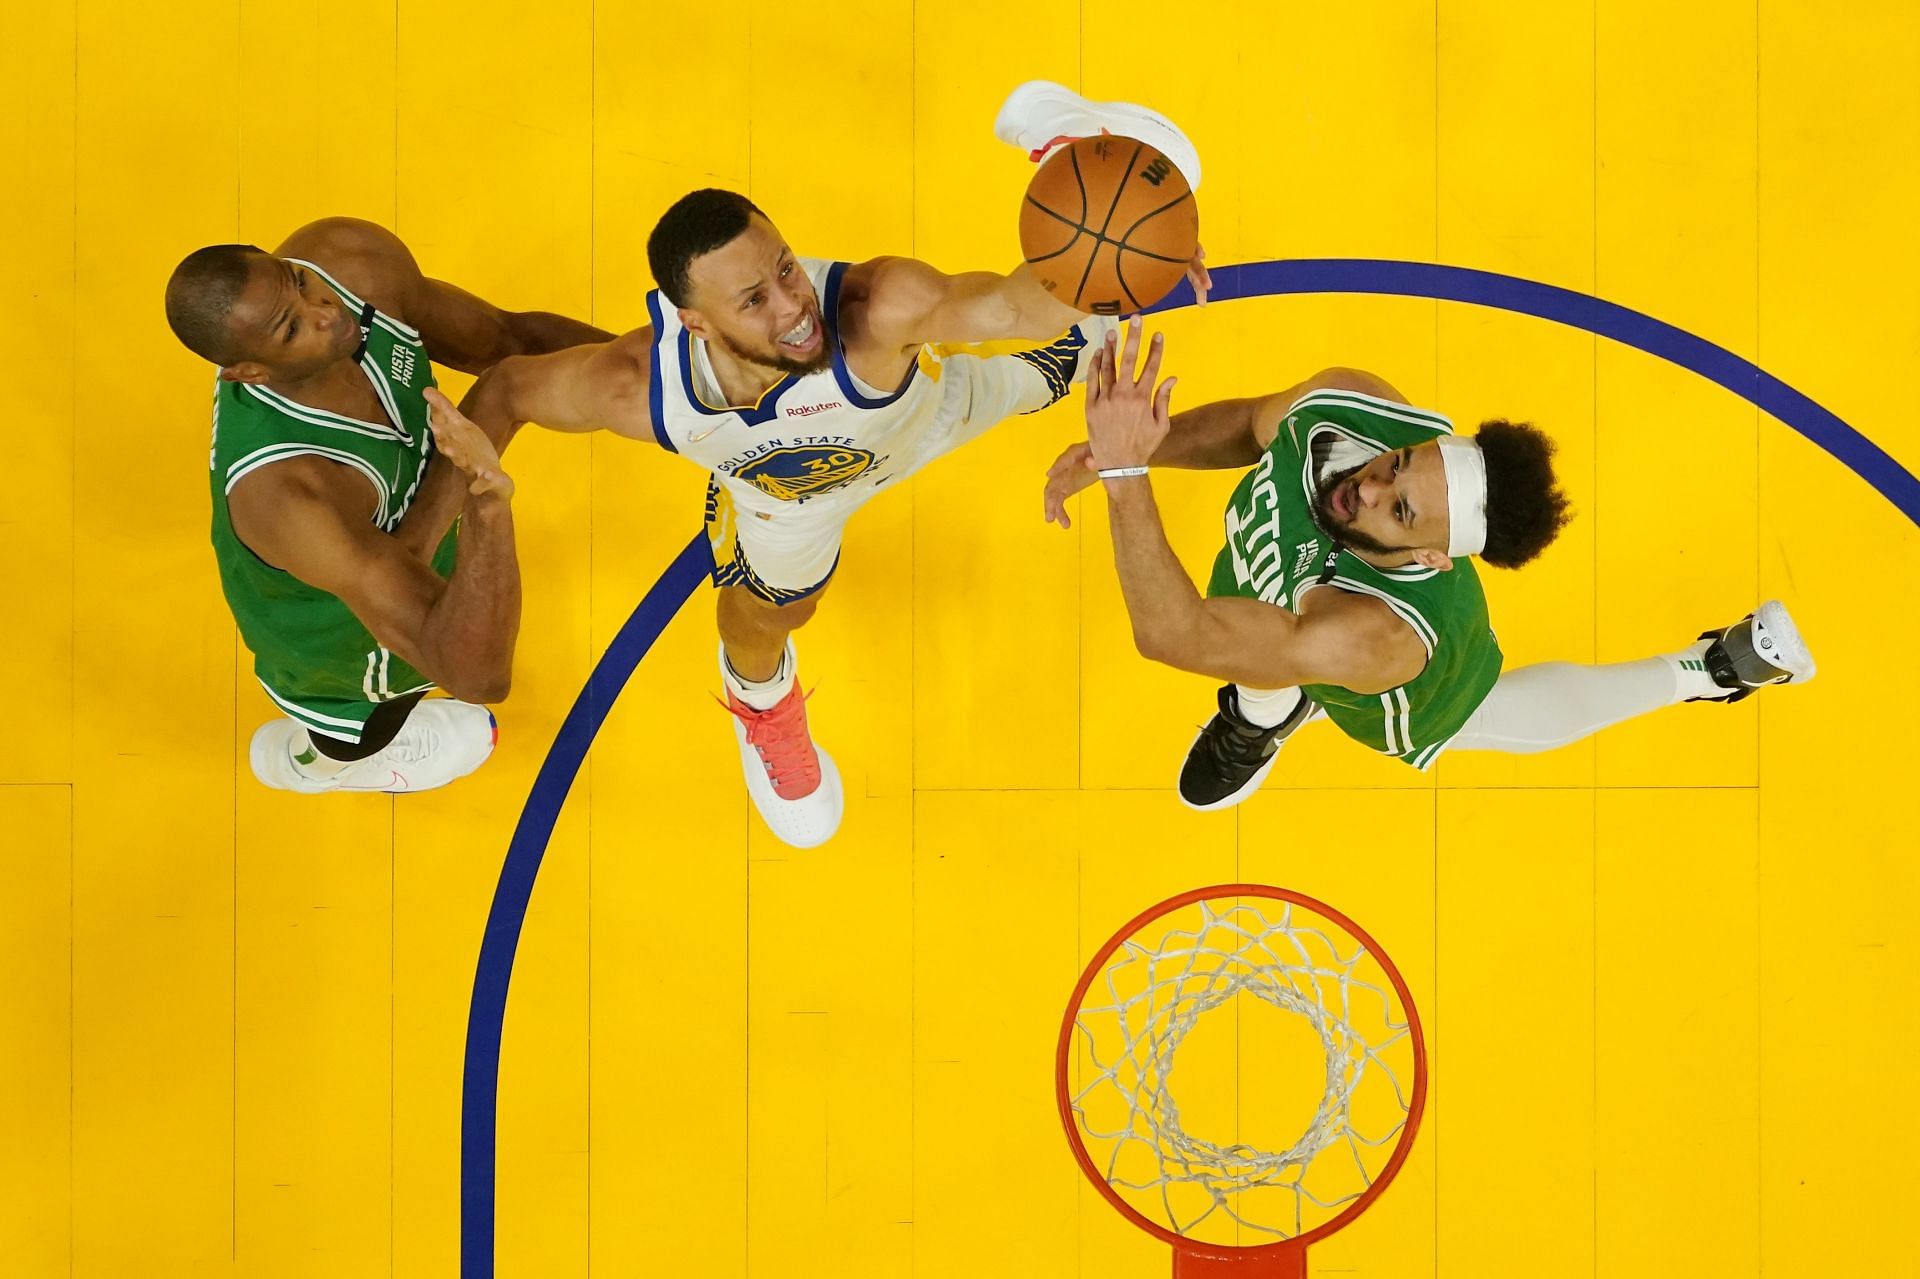 Despite being the primary target for the Celtics, Curry led all scorers with 29 points.